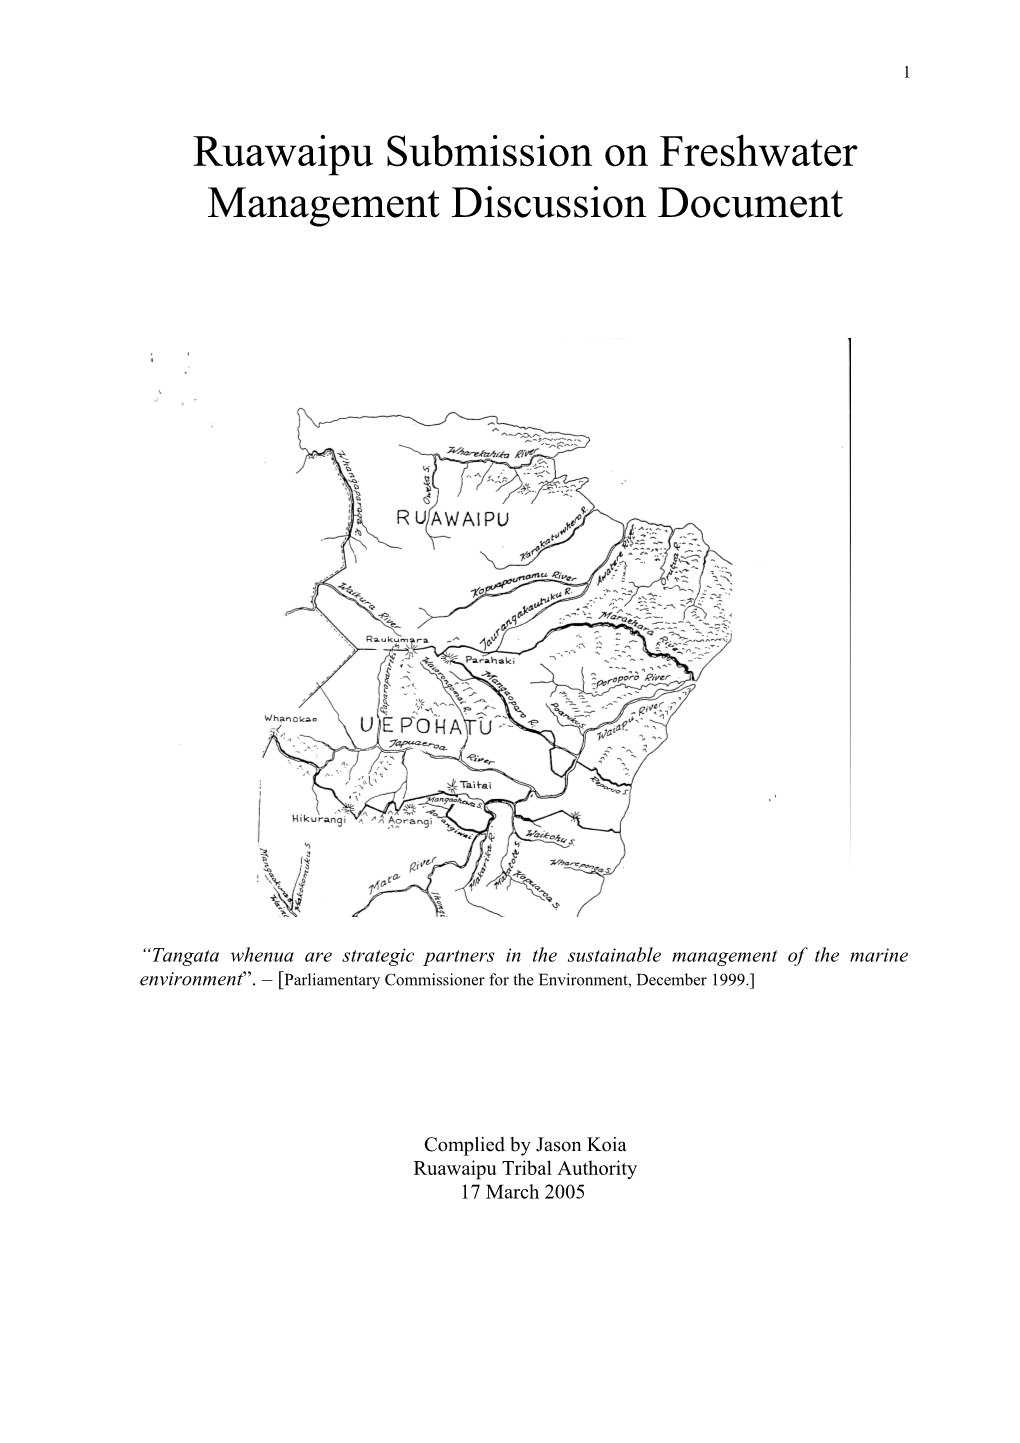 Submission on Freshwater Management Discussion Document